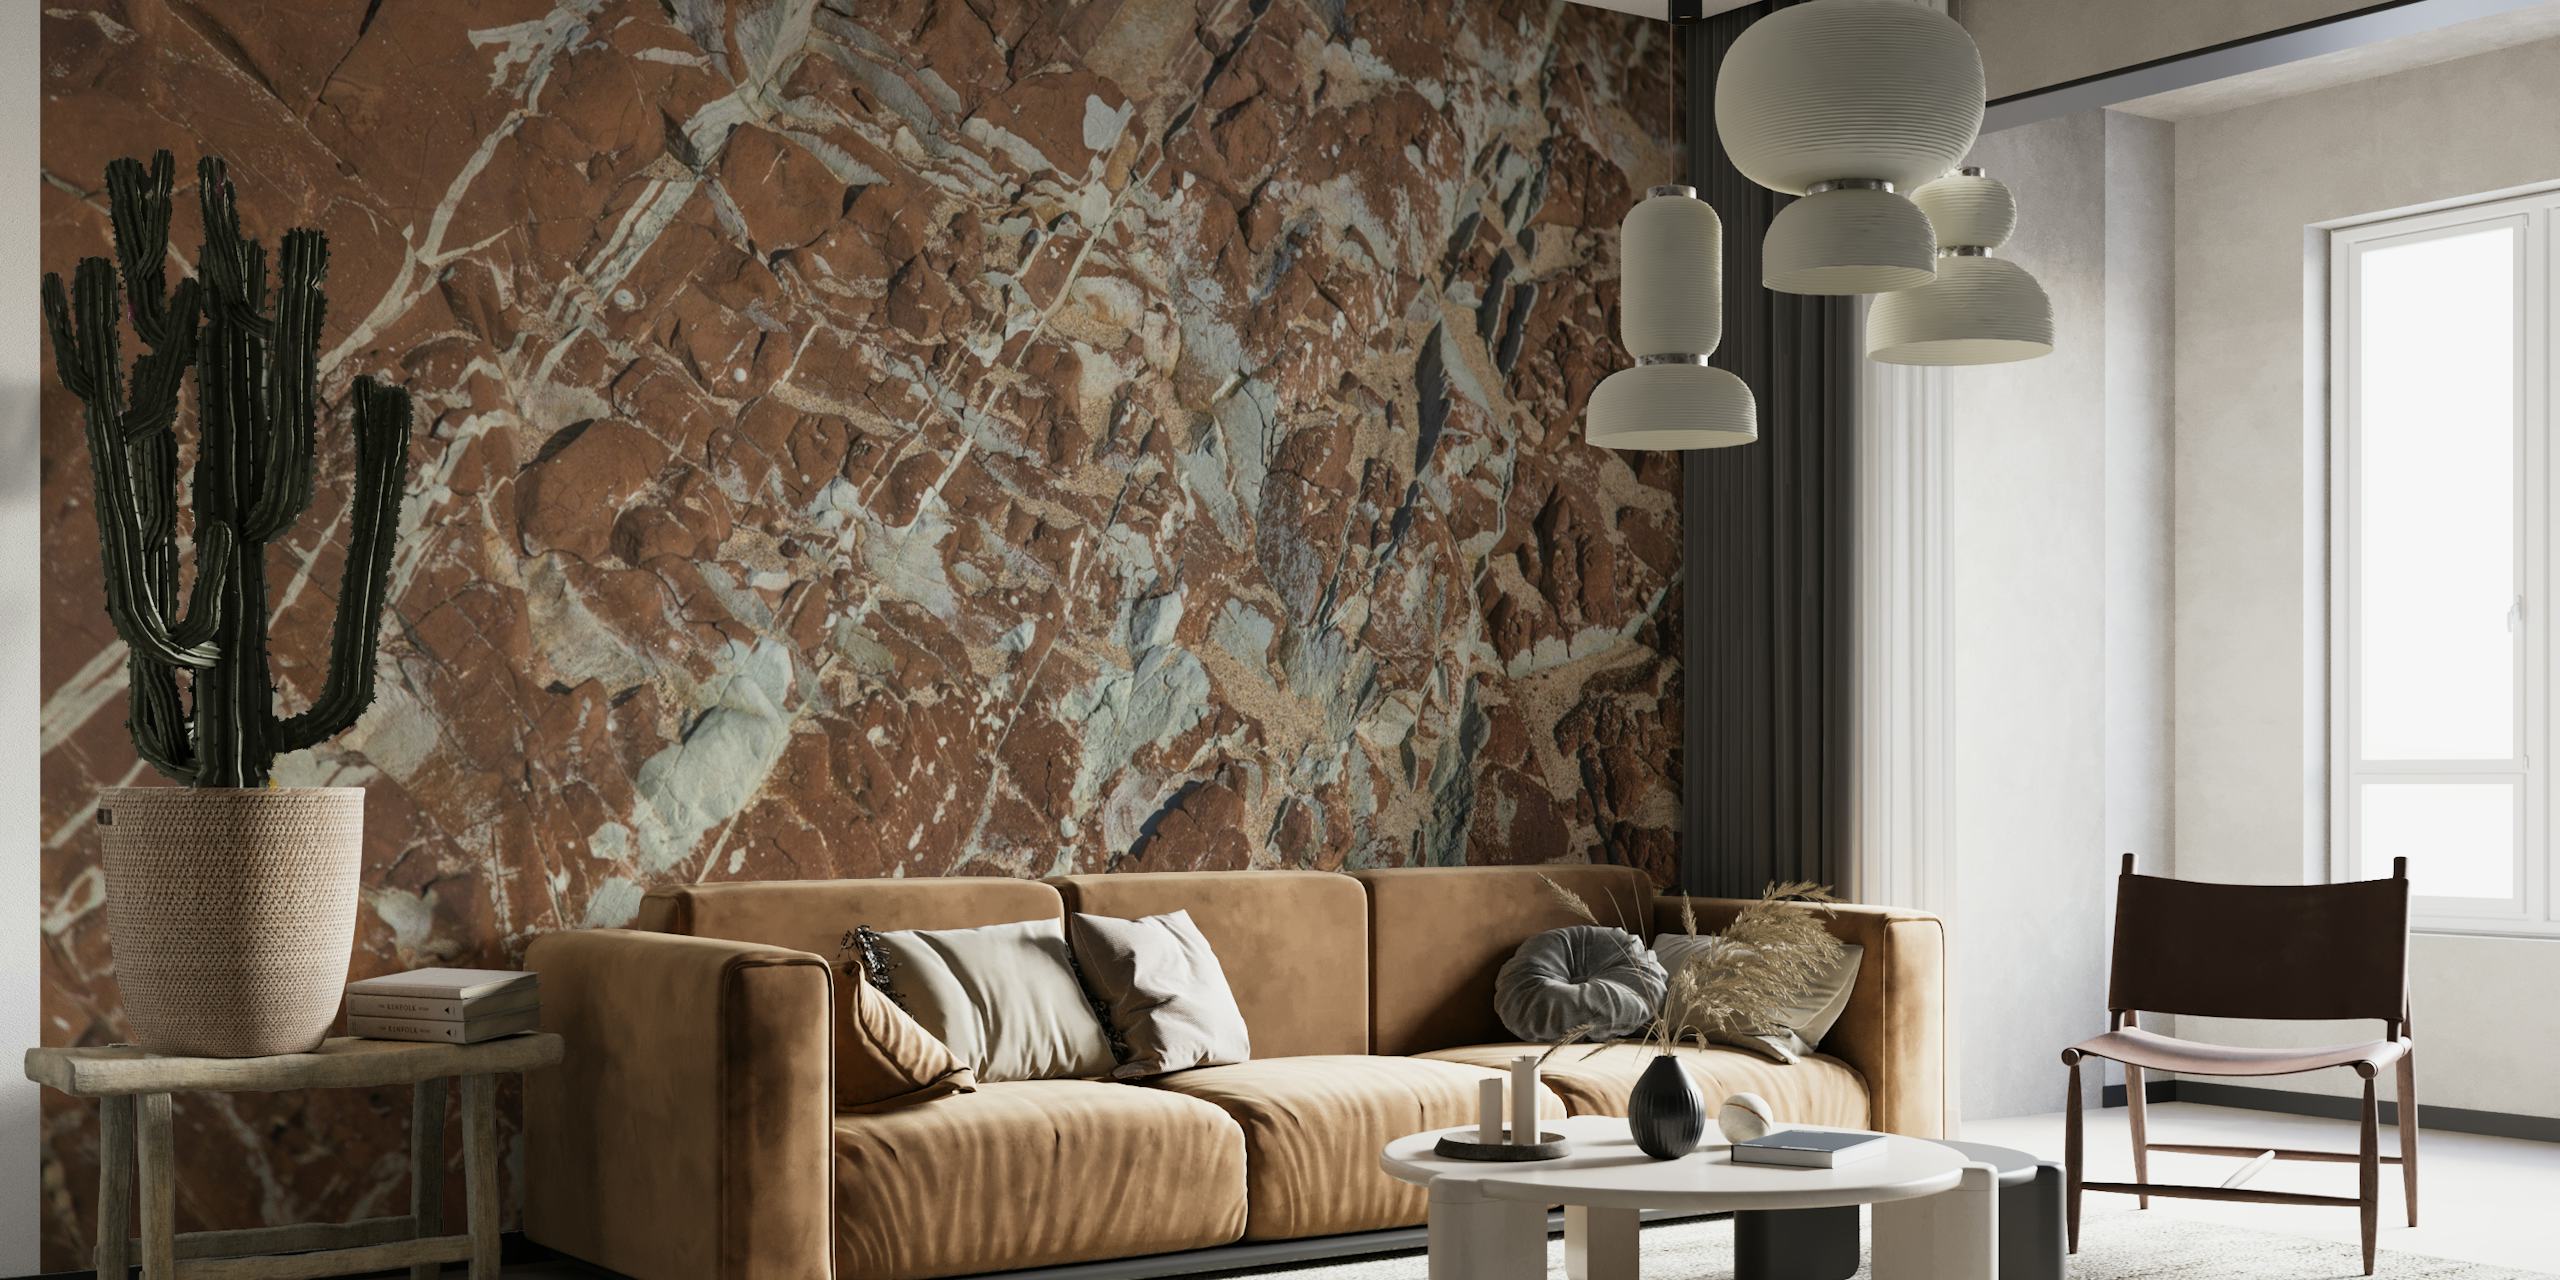 Massive Rock wall mural depicting detailed rocky terrain with rich earthy tones